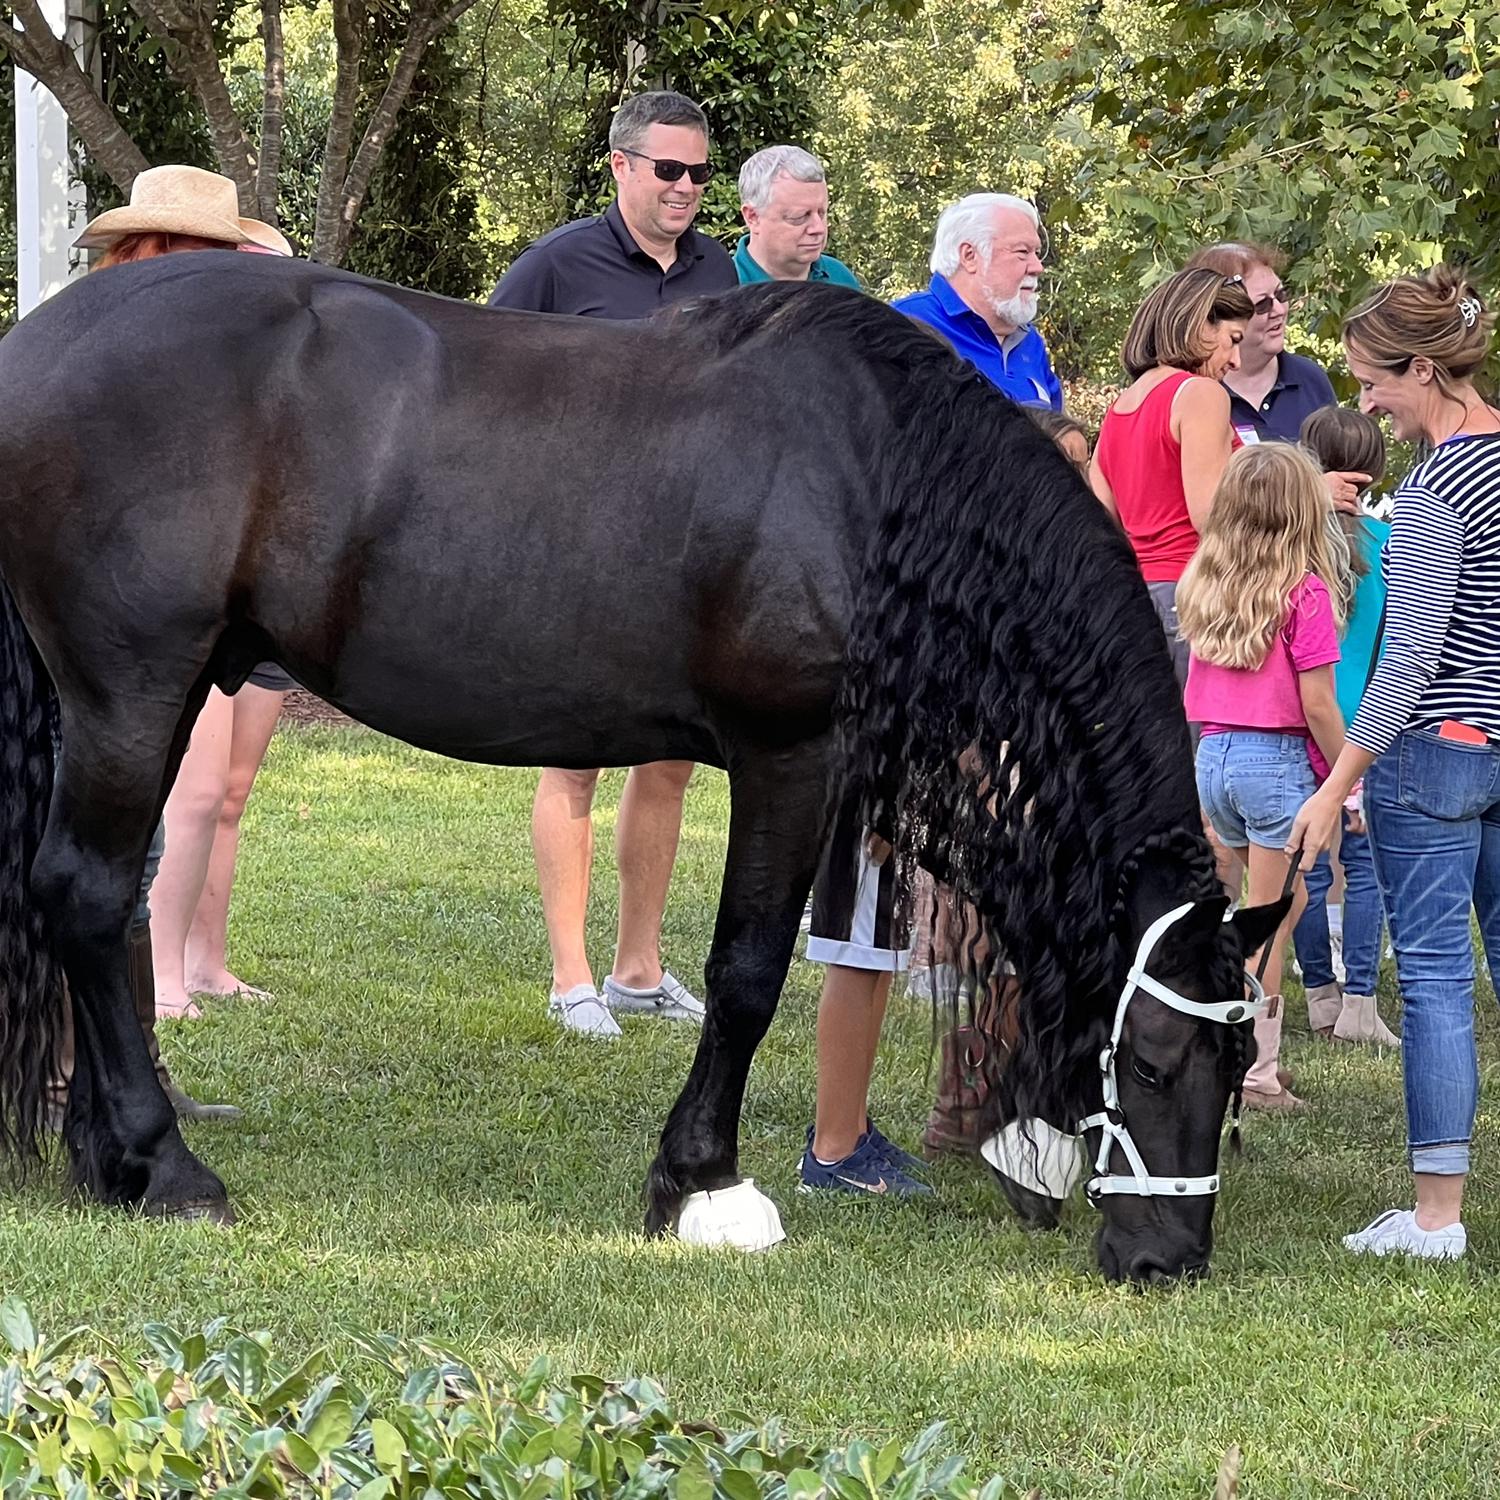 We attended one of the summer’s neighborhood events and captured this photo one of the many beautiful horses in our neighborhood.